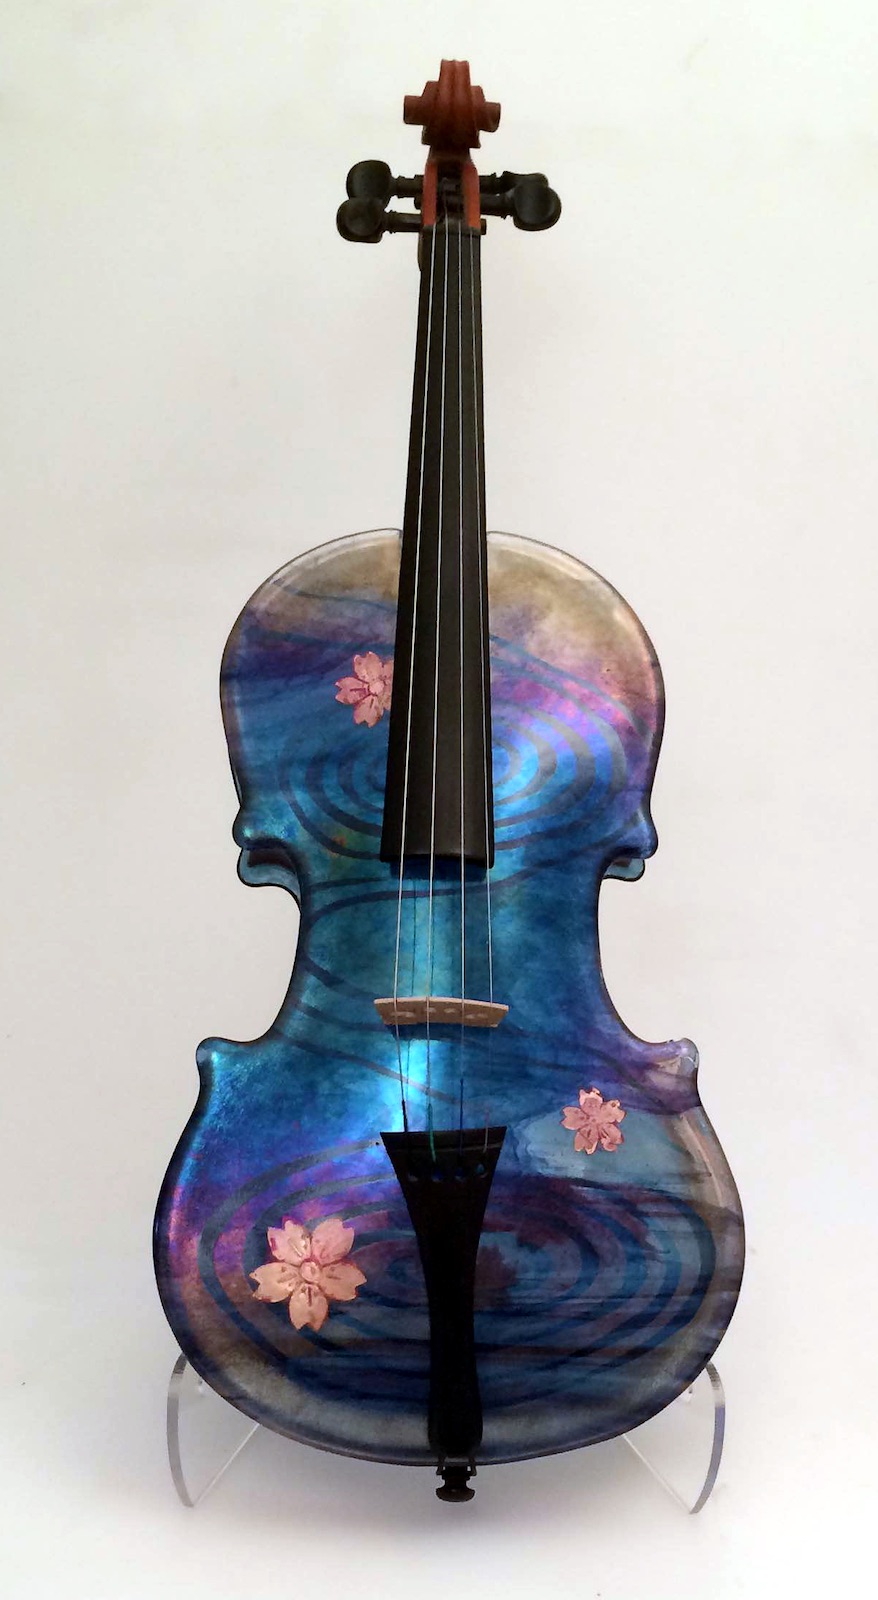 Violin with glass front and back. The glass front features an iridescent swirling design with bring copper cherry blossomes